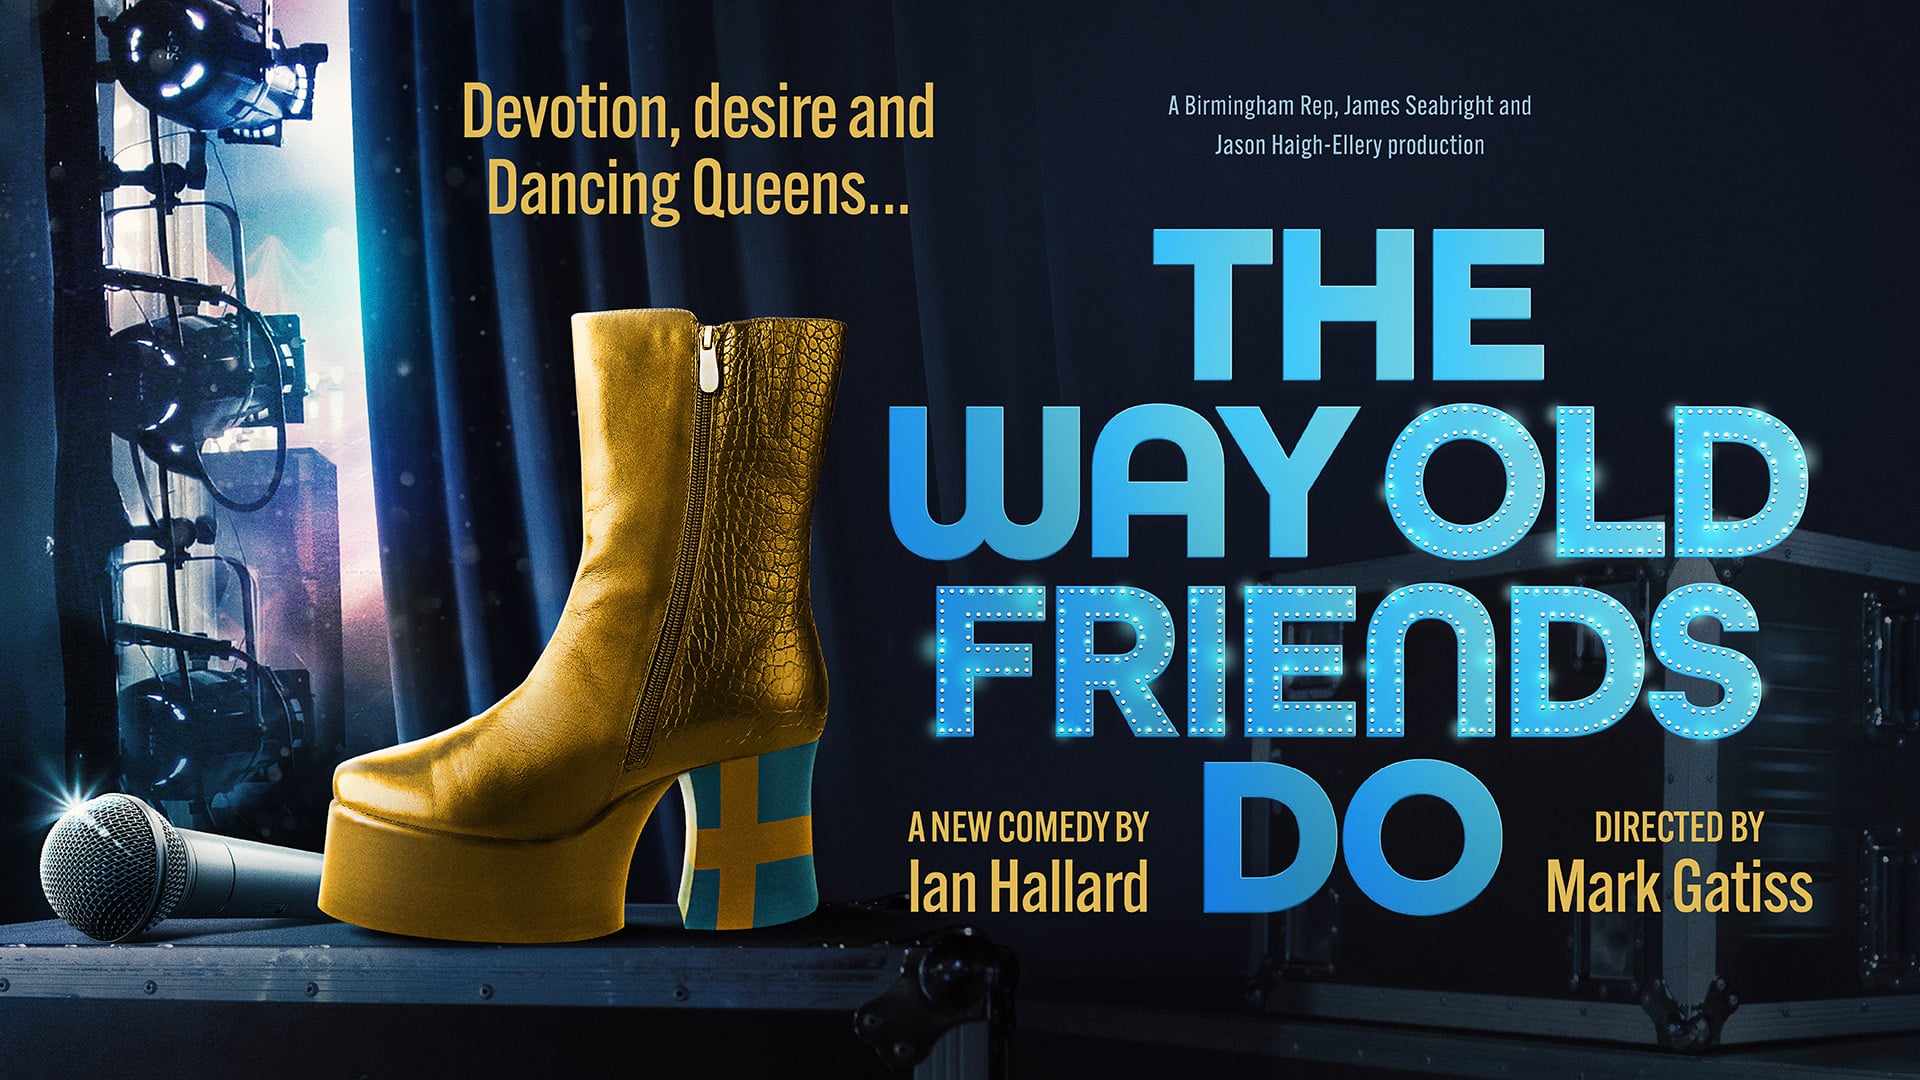 A picture of a golden ladies' boot with a Swedish flag on the heel, next to a microphone backstage in front of a blue curtain and stage lights. Text reads: A Birmingham Rep, James Seabright and Jason Haigh-Ellery production; The Way Old Friends Do; A new comedy by Ian Hallard; Directed by Mark Gatiss; Devotion, desire and Dancing Queens...